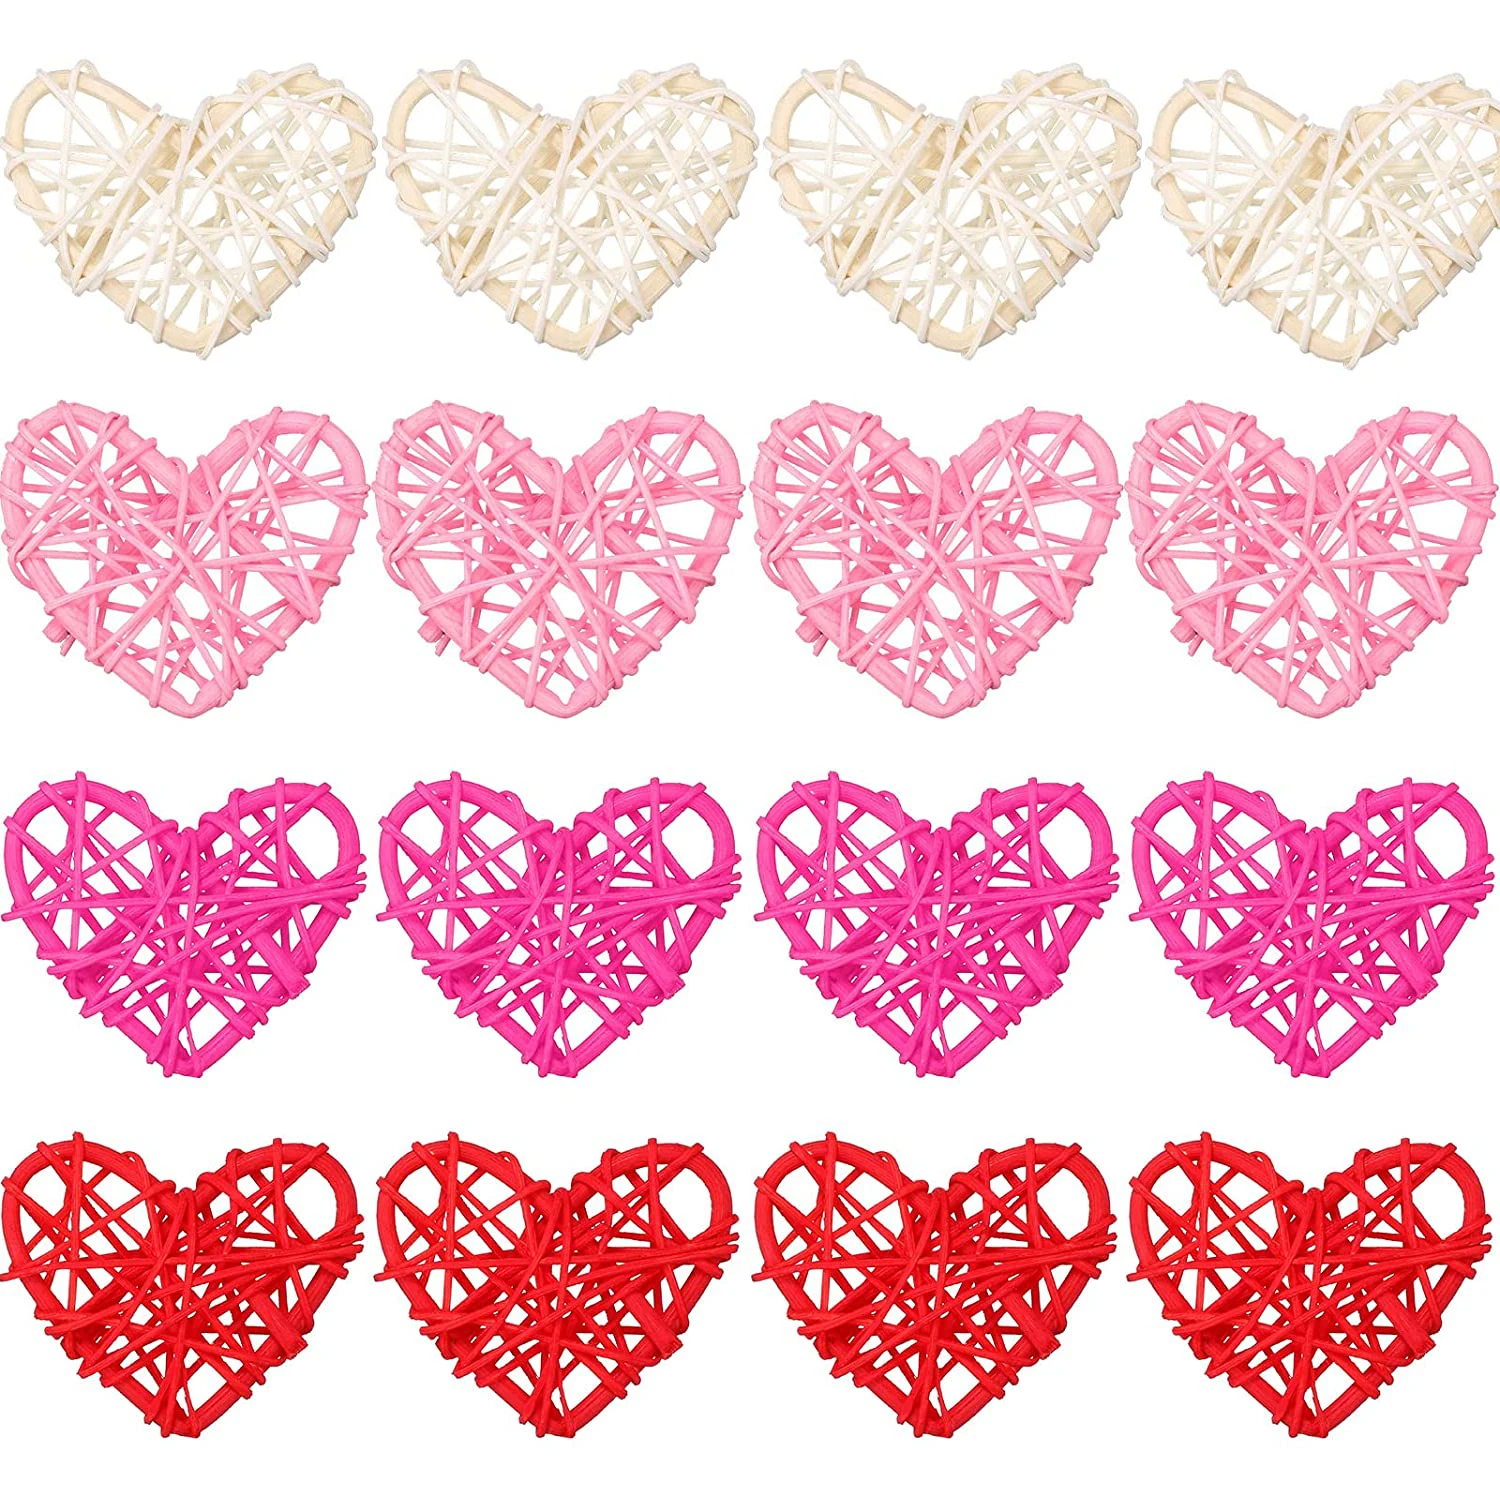 20 Pcs 2.36 Inch Mixed Colors Heart Shaped Vase Filler Natural Wicker Rattan Decor Heart Shaped Decor for Party Supplies